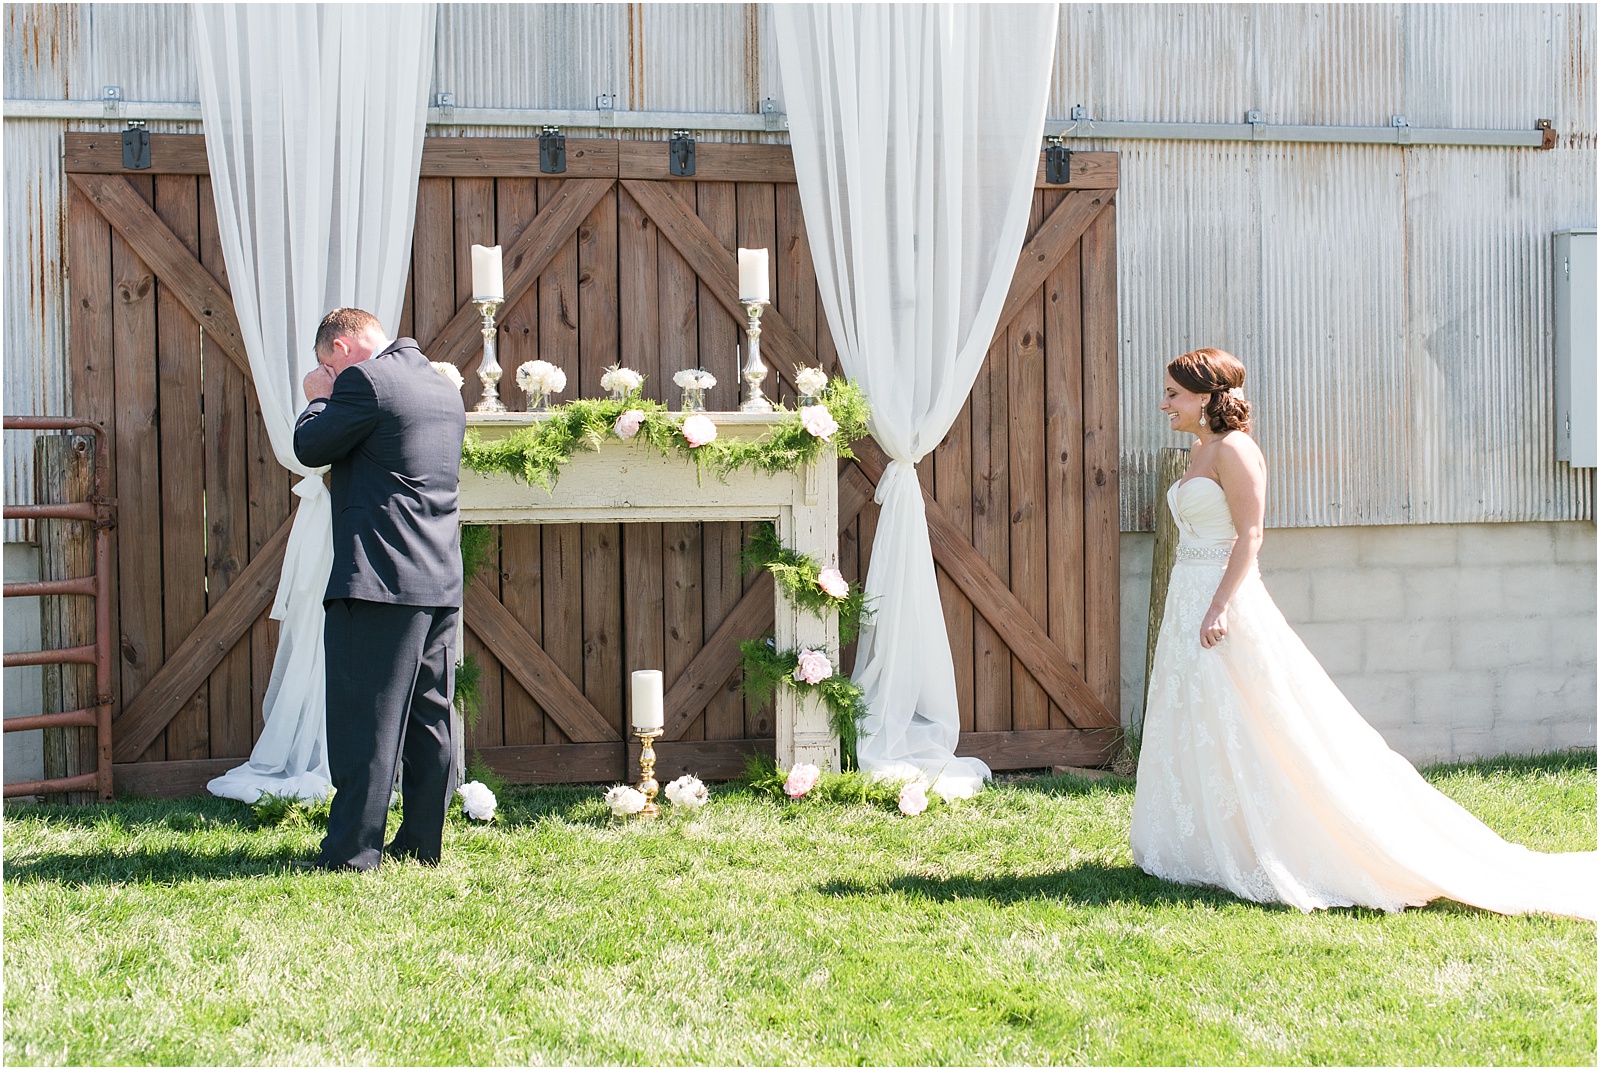 A Country Chic Starlight Meadows Wedding, Burlington NC, ceremony details, ceremony centerpiece, ceremony greenery, outdoor wedding ceremony, outdoor wedding ceremony centerpiece, Starlight Meadows, Flowers By Gary, first look, bride and groom first look